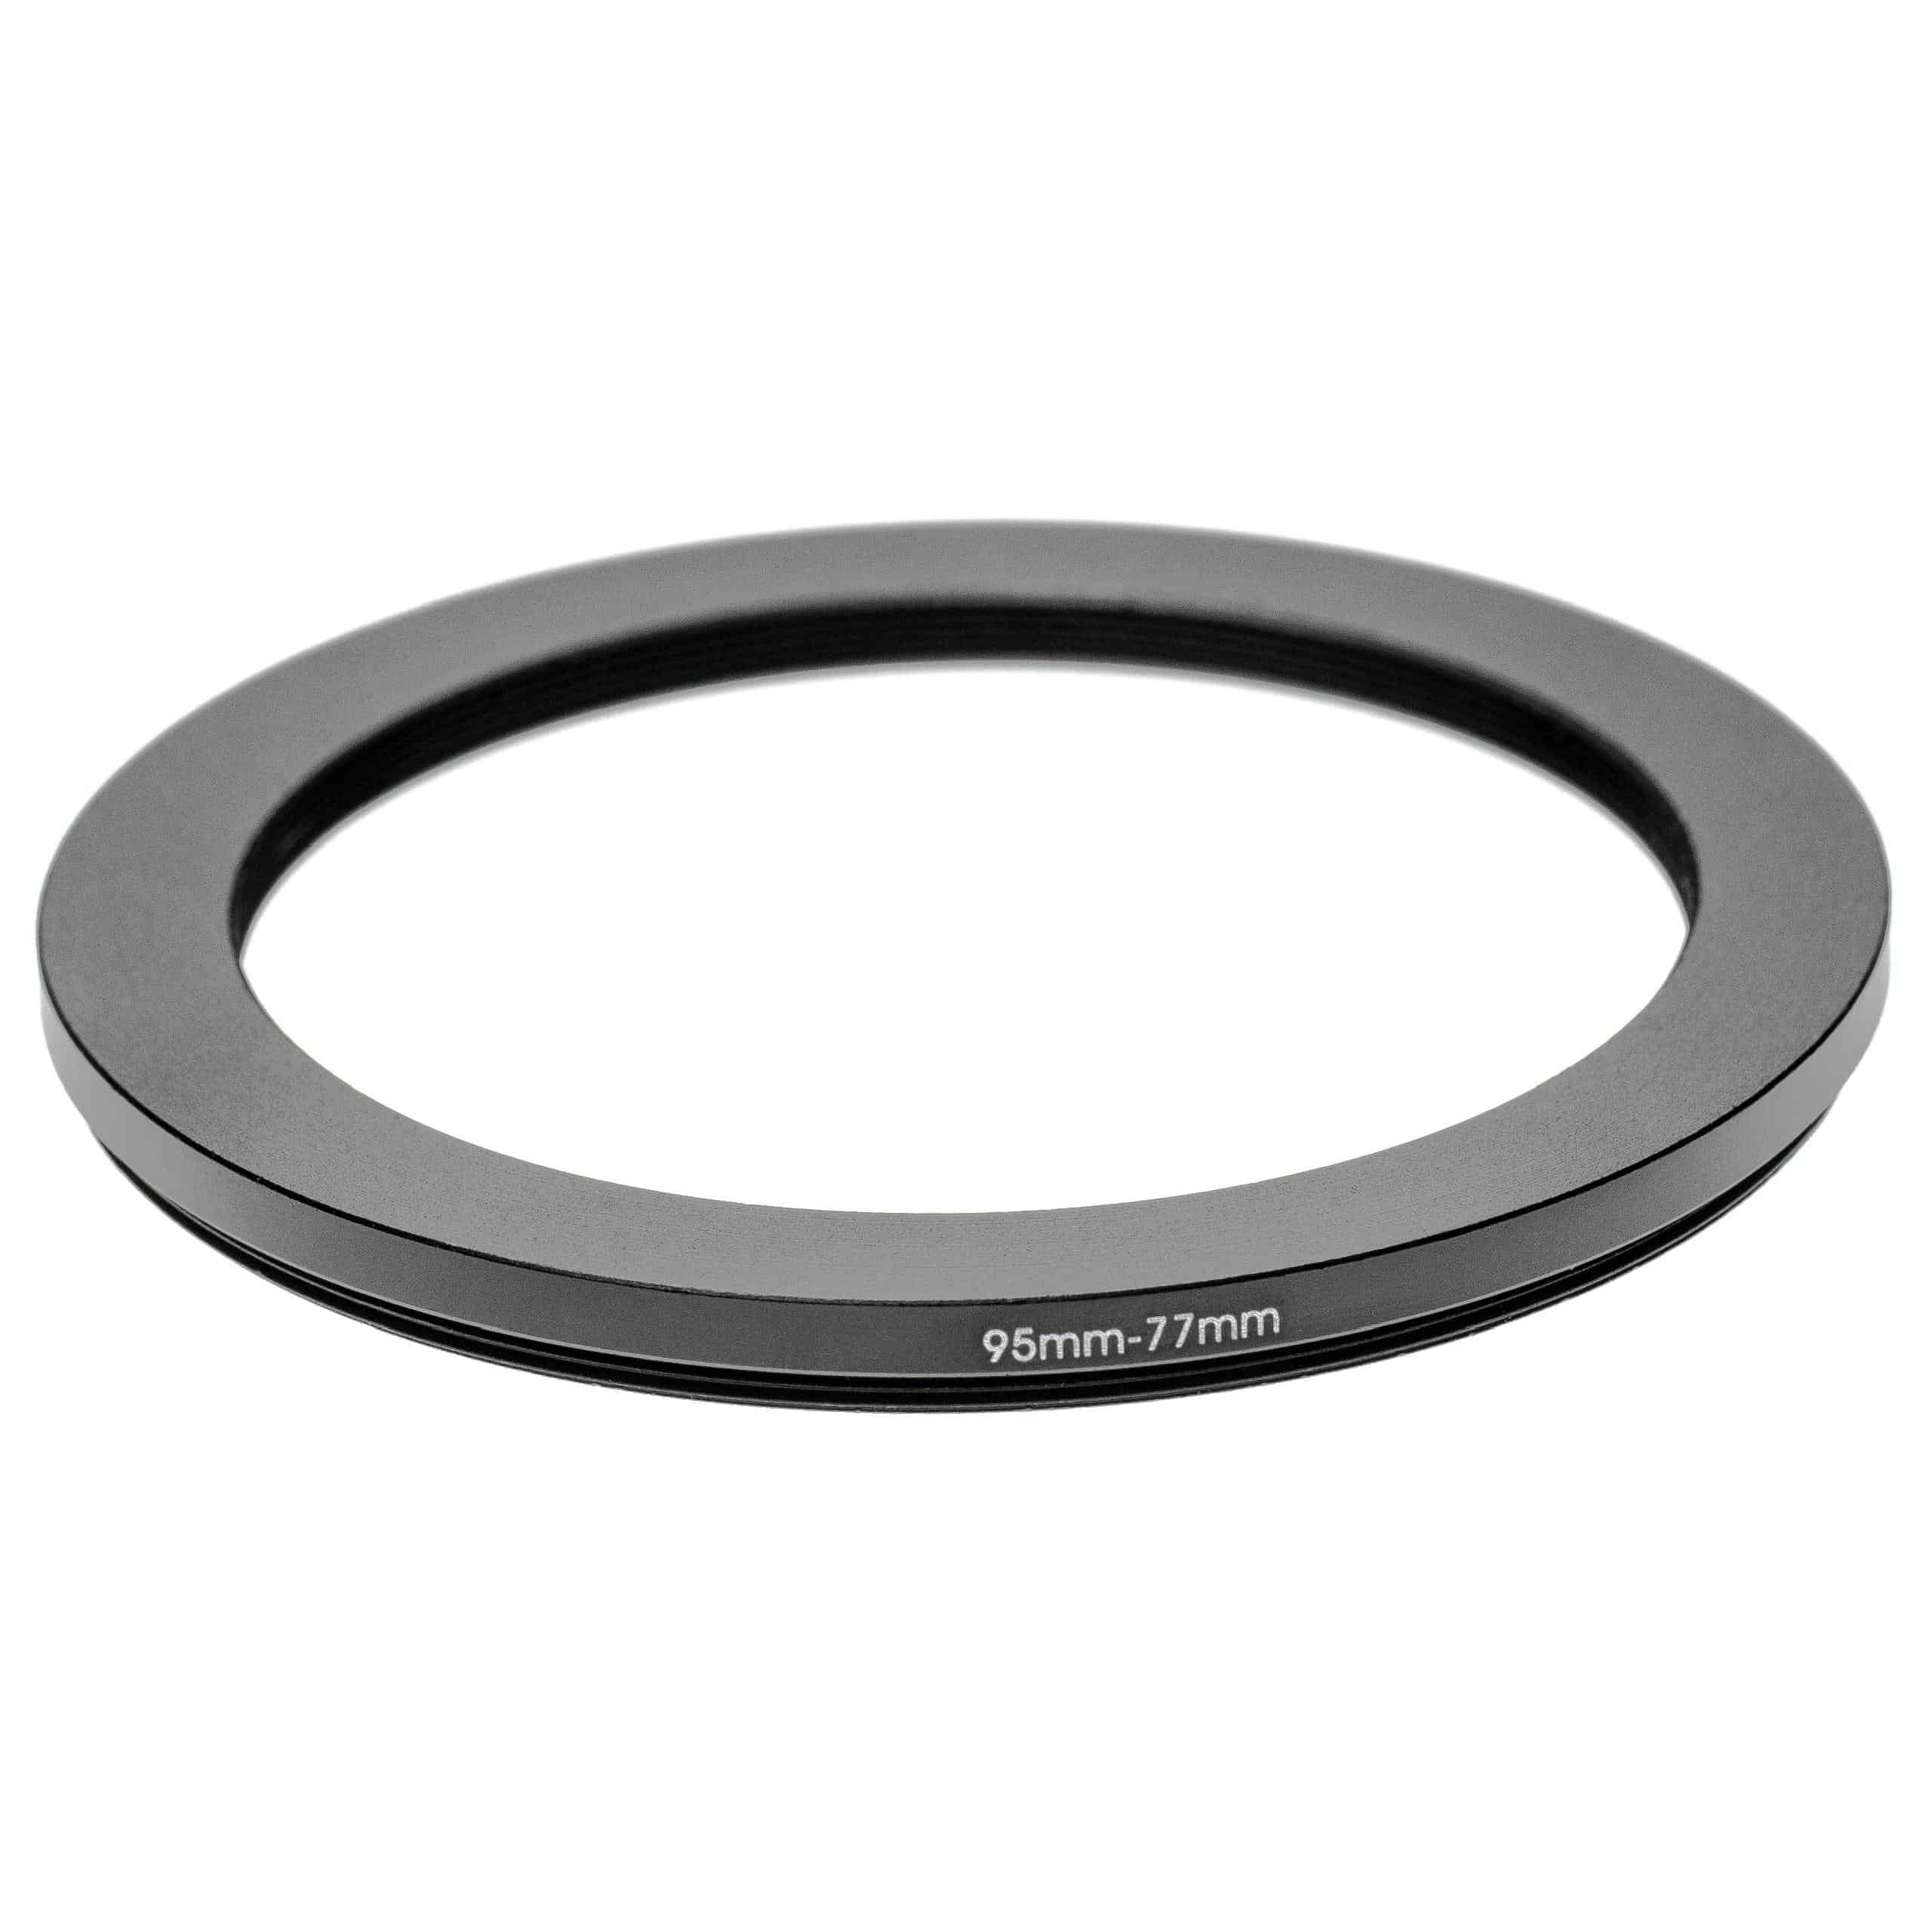 Step-Down Ring Adapter from 95 mm to 77 mm suitable for Camera Lens - Filter Adapter, Aluminium (Anodised)